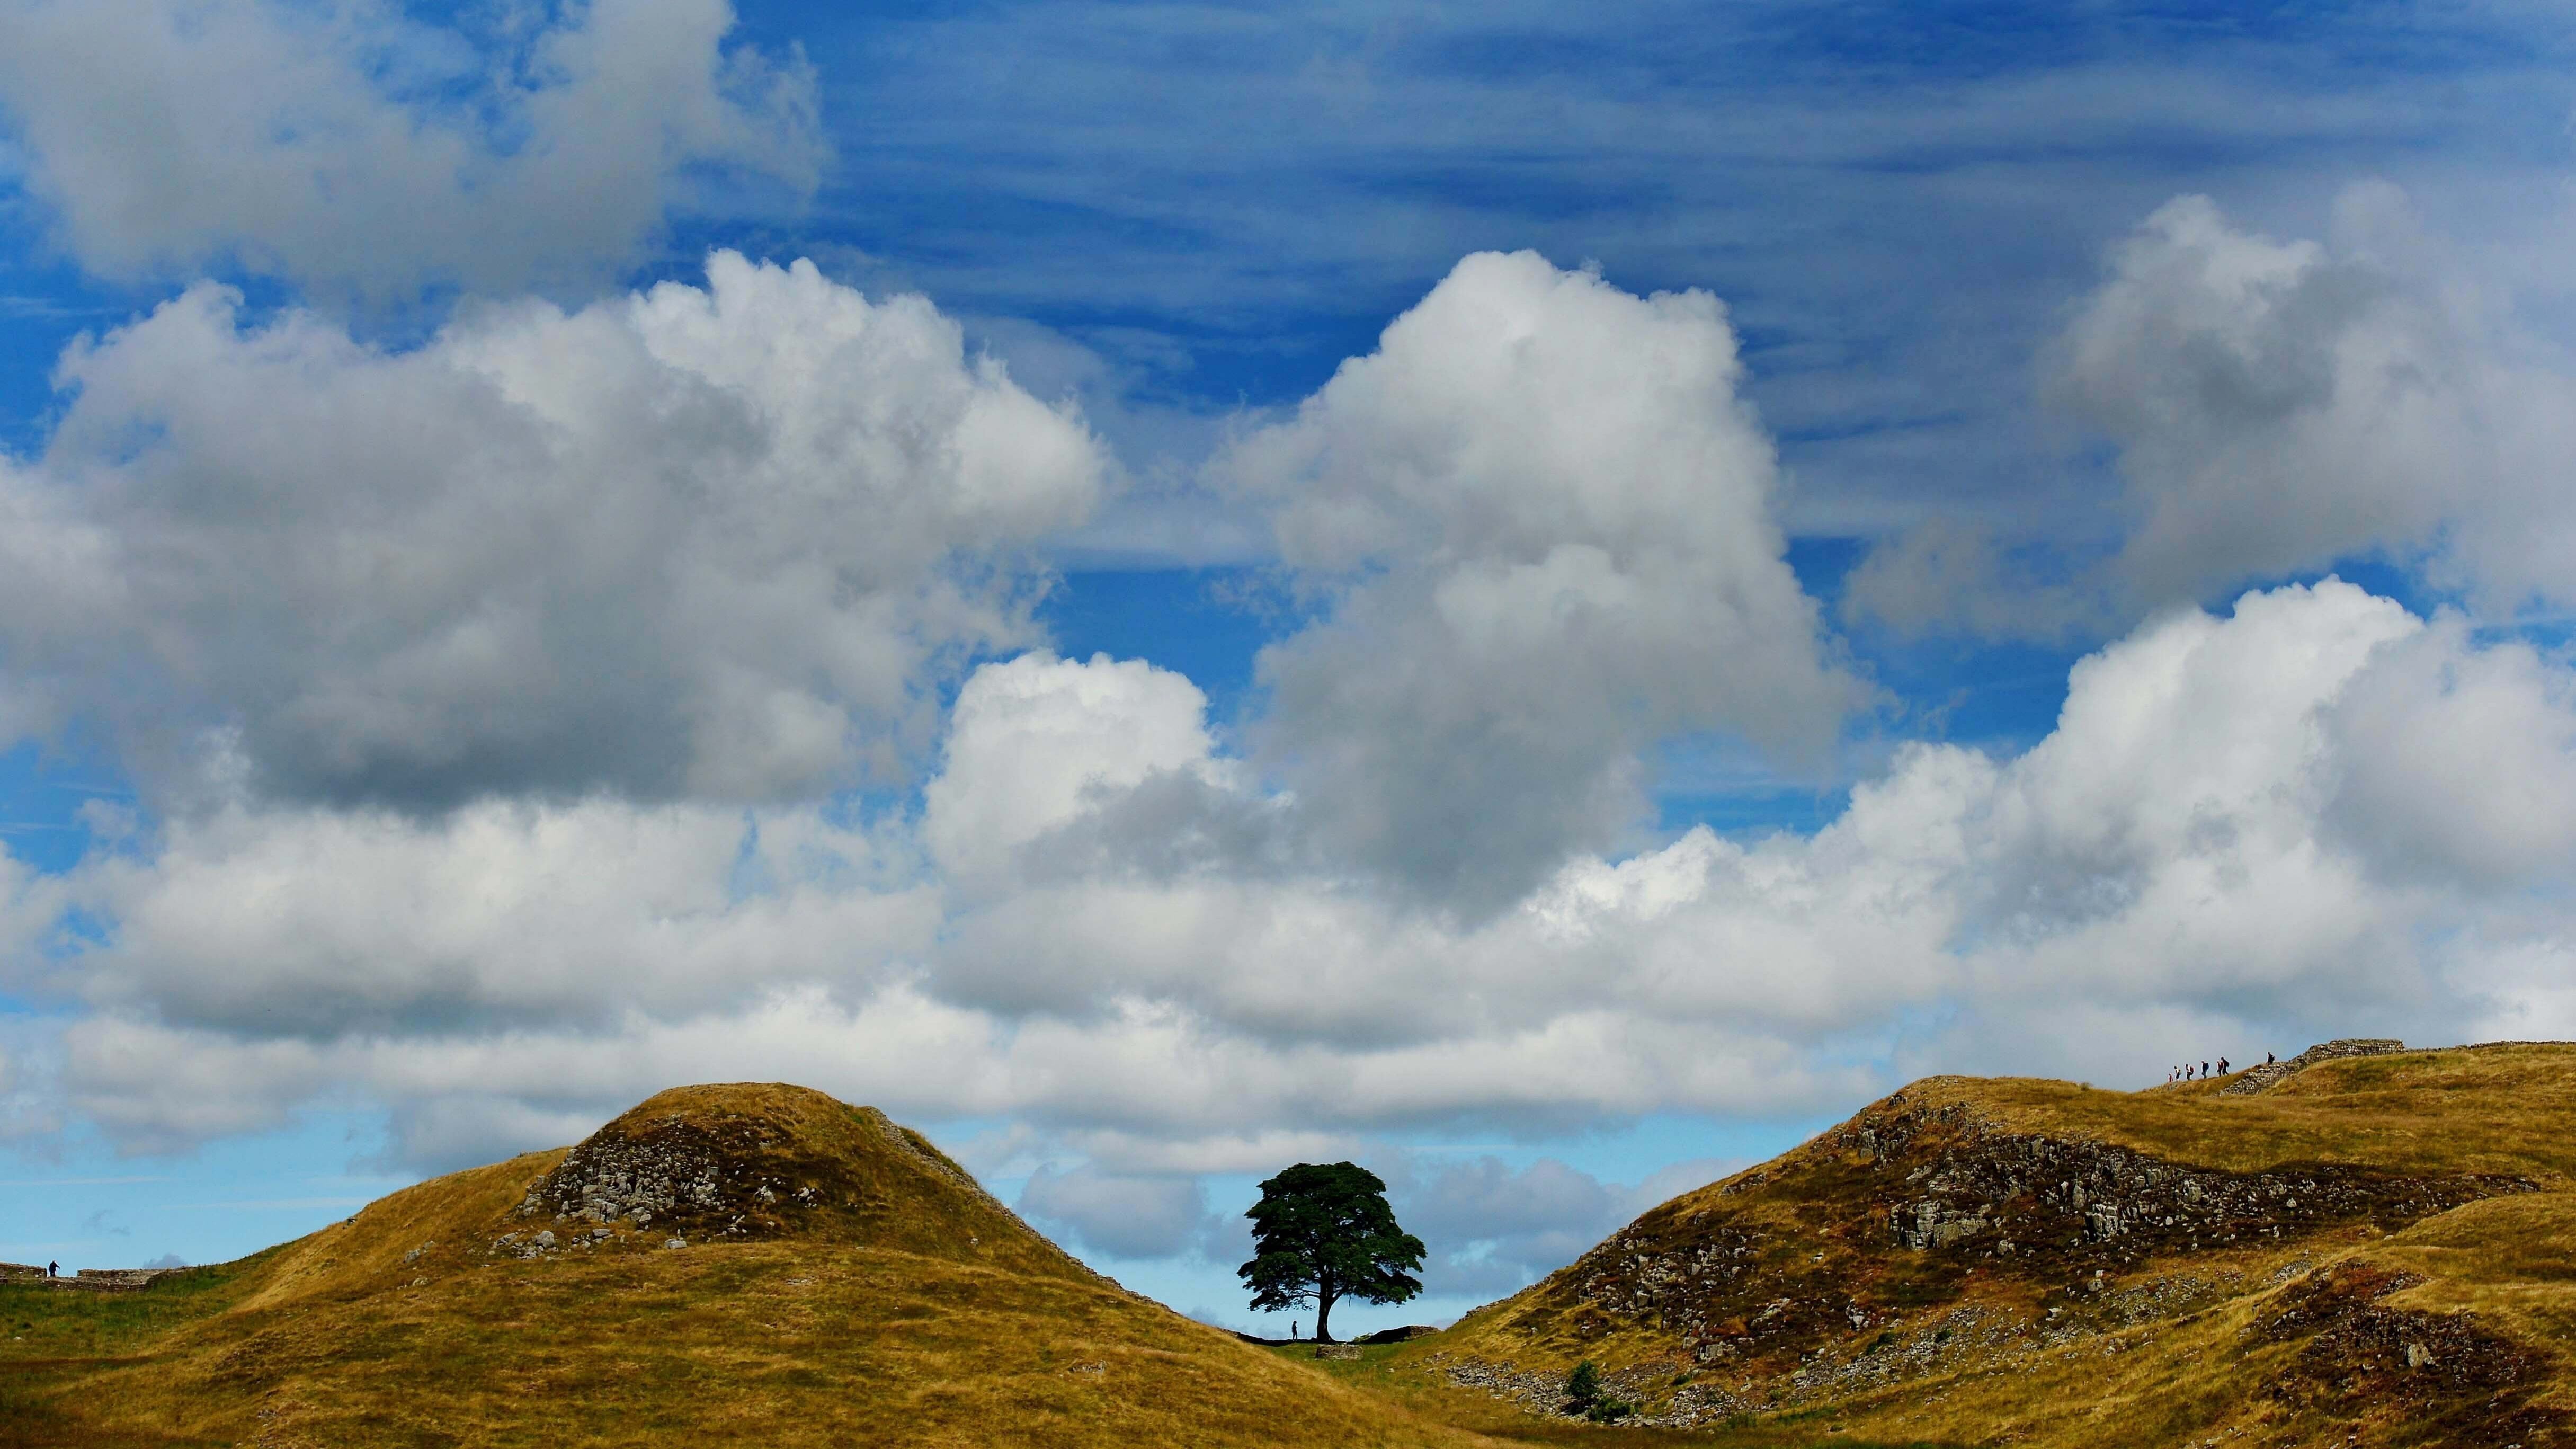 The tree, which stood next to Hadrian’s Wall in Northumberland for 200 years, was chopped down in September last year